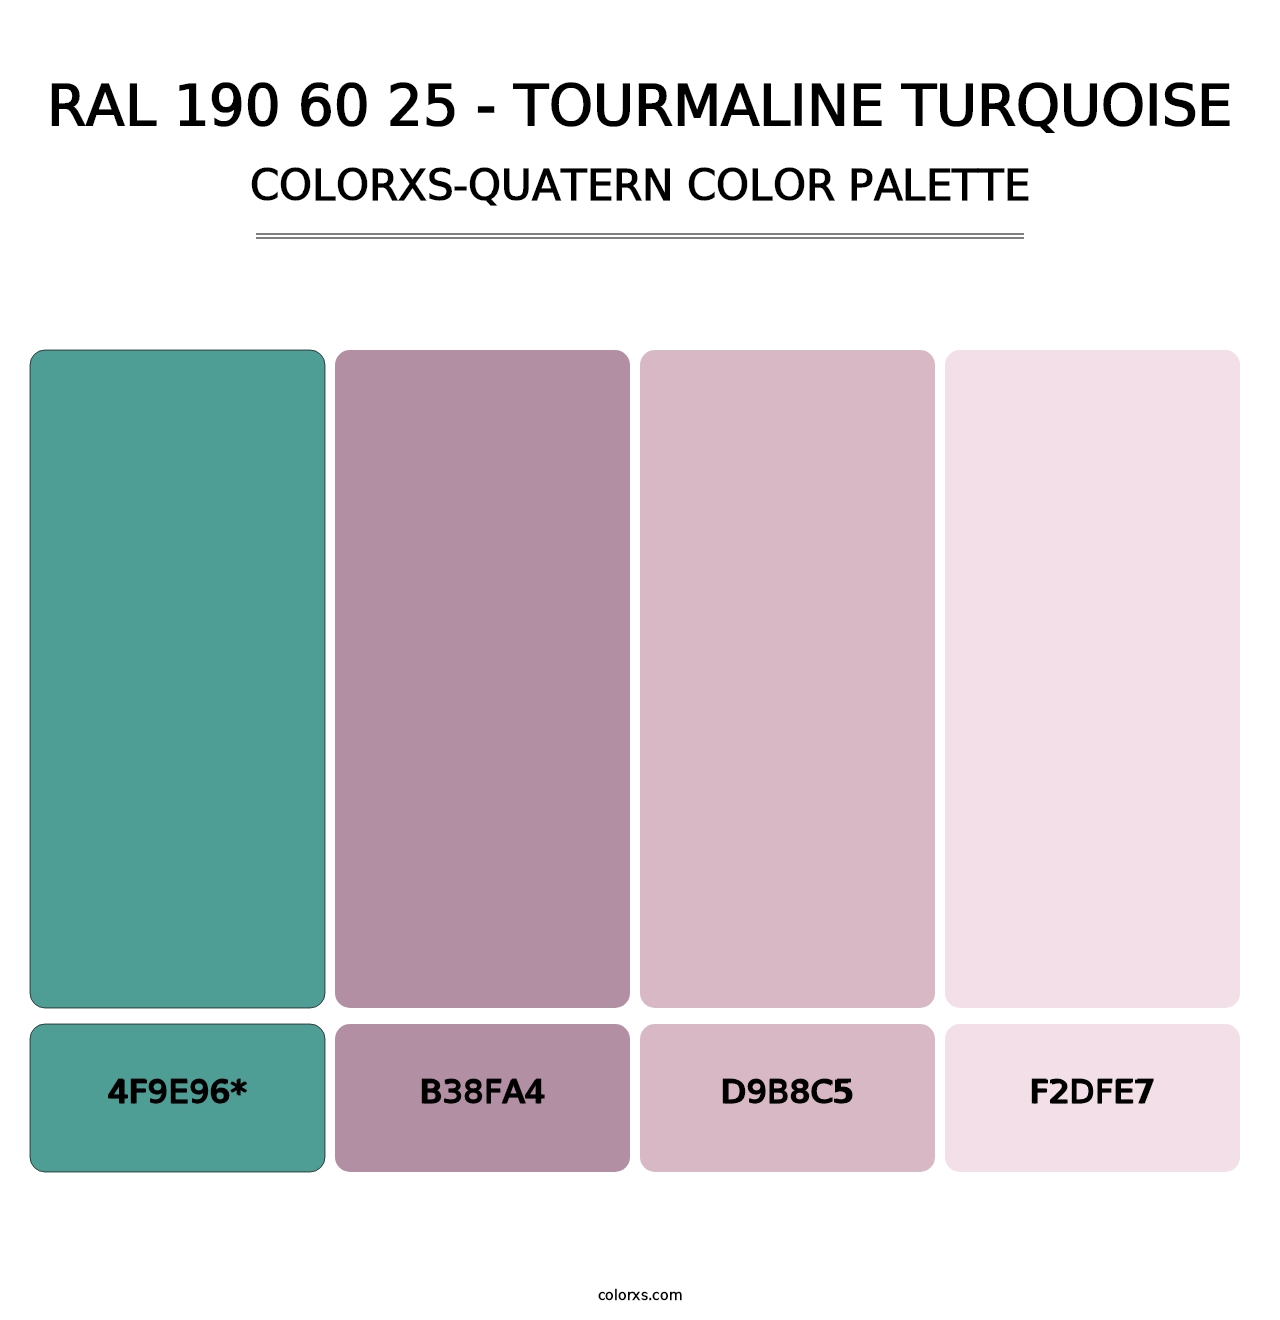 RAL 190 60 25 - Tourmaline Turquoise - Colorxs Quatern Palette